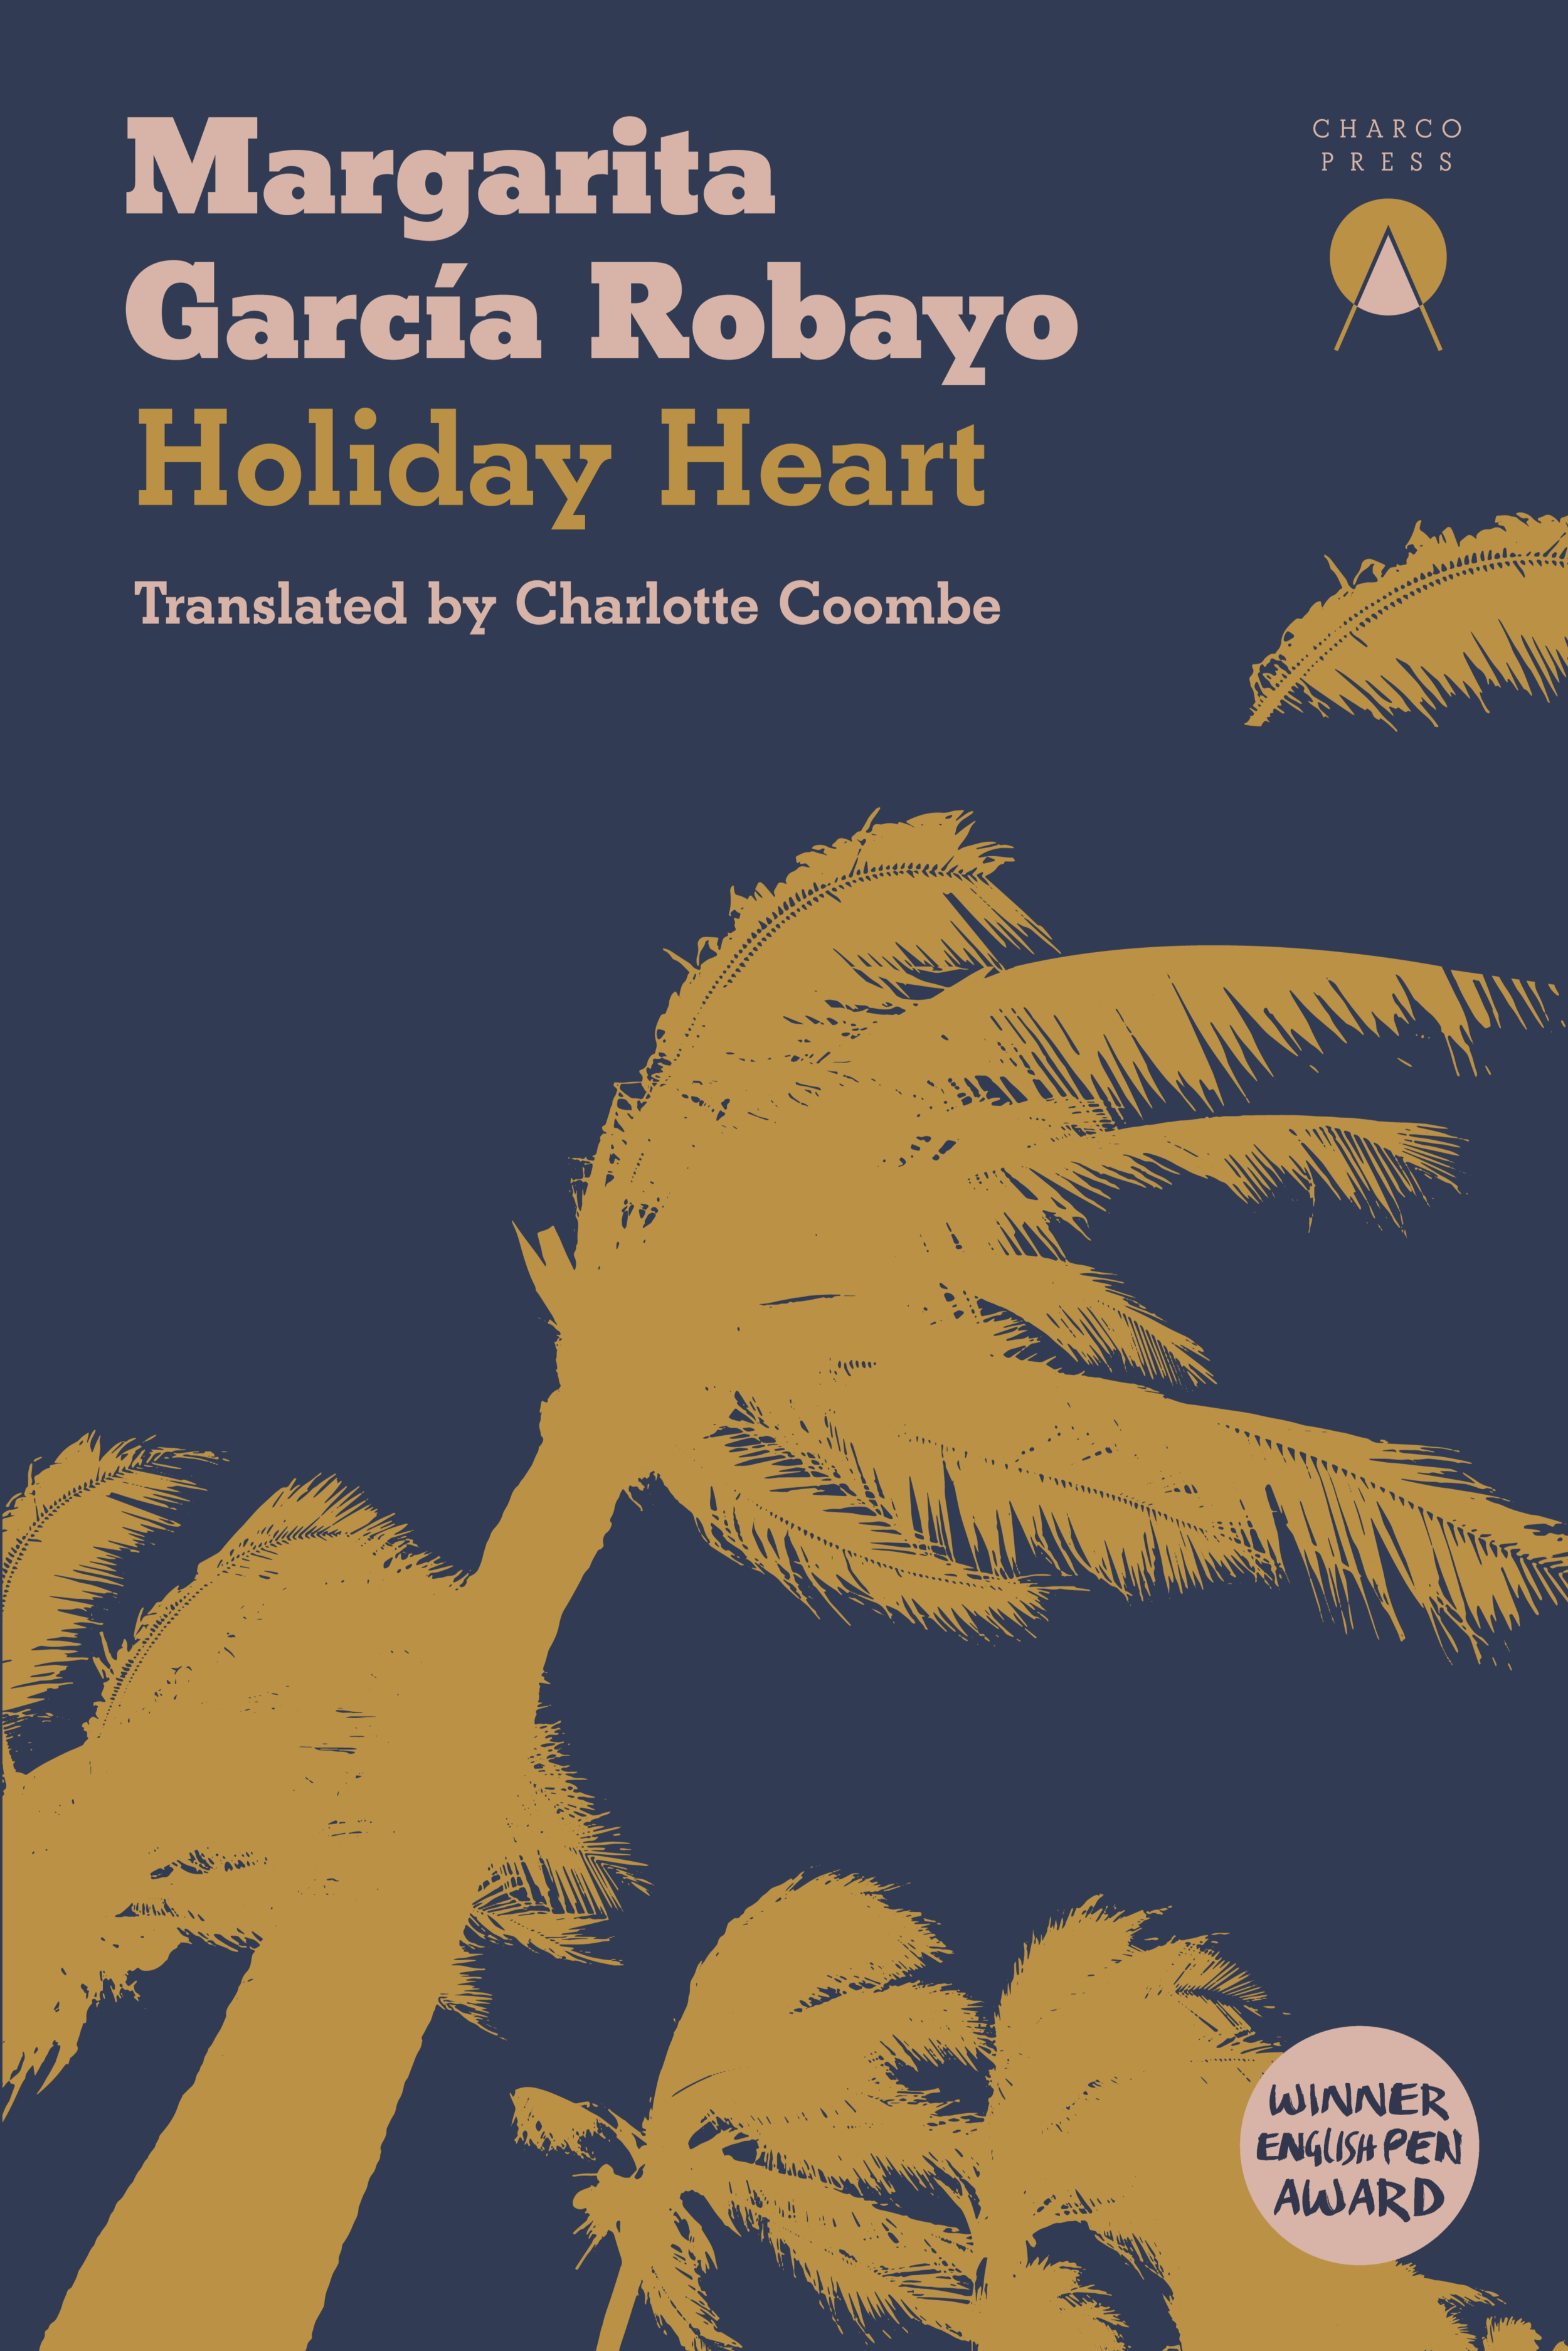 Book cover of Holiday Heart by Margarita García Robayo by Charlie Coombe